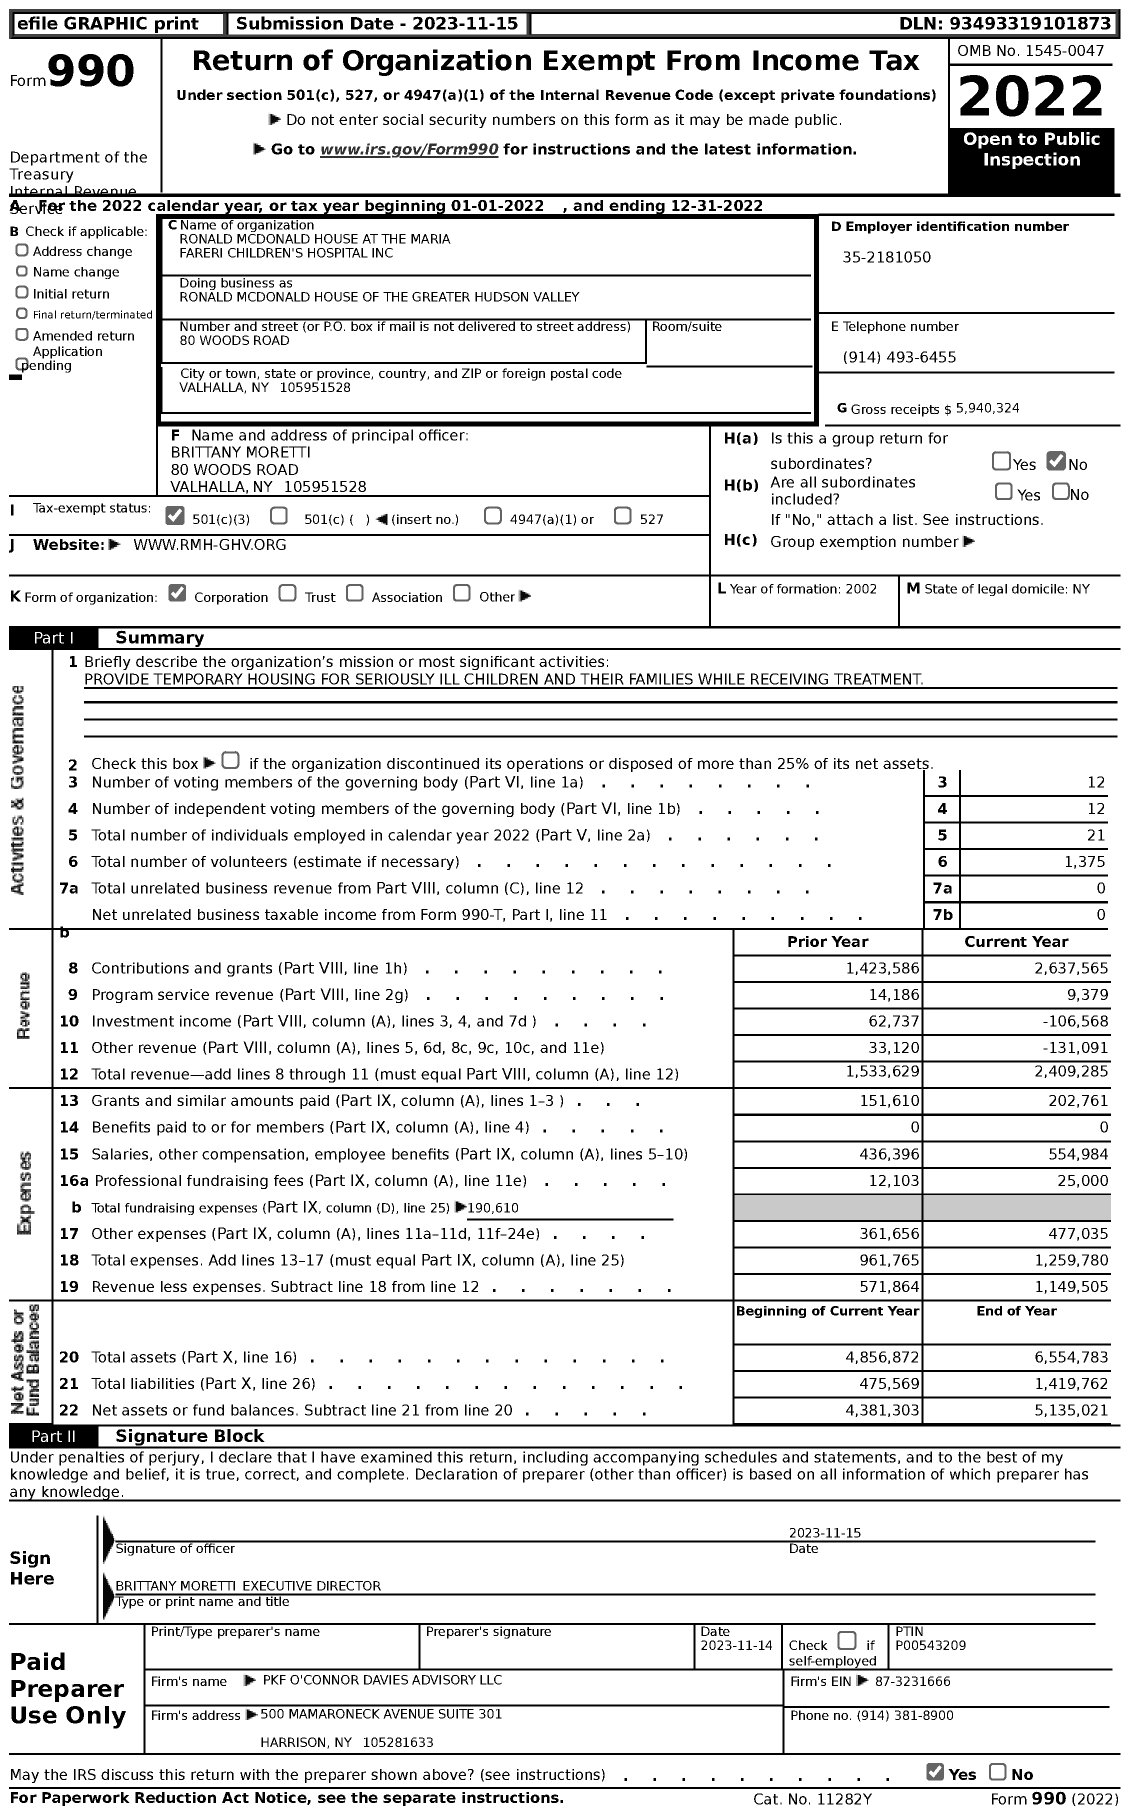 Image of first page of 2022 Form 990 for Ronald Mcdonald House of the Greater Hudson Valley